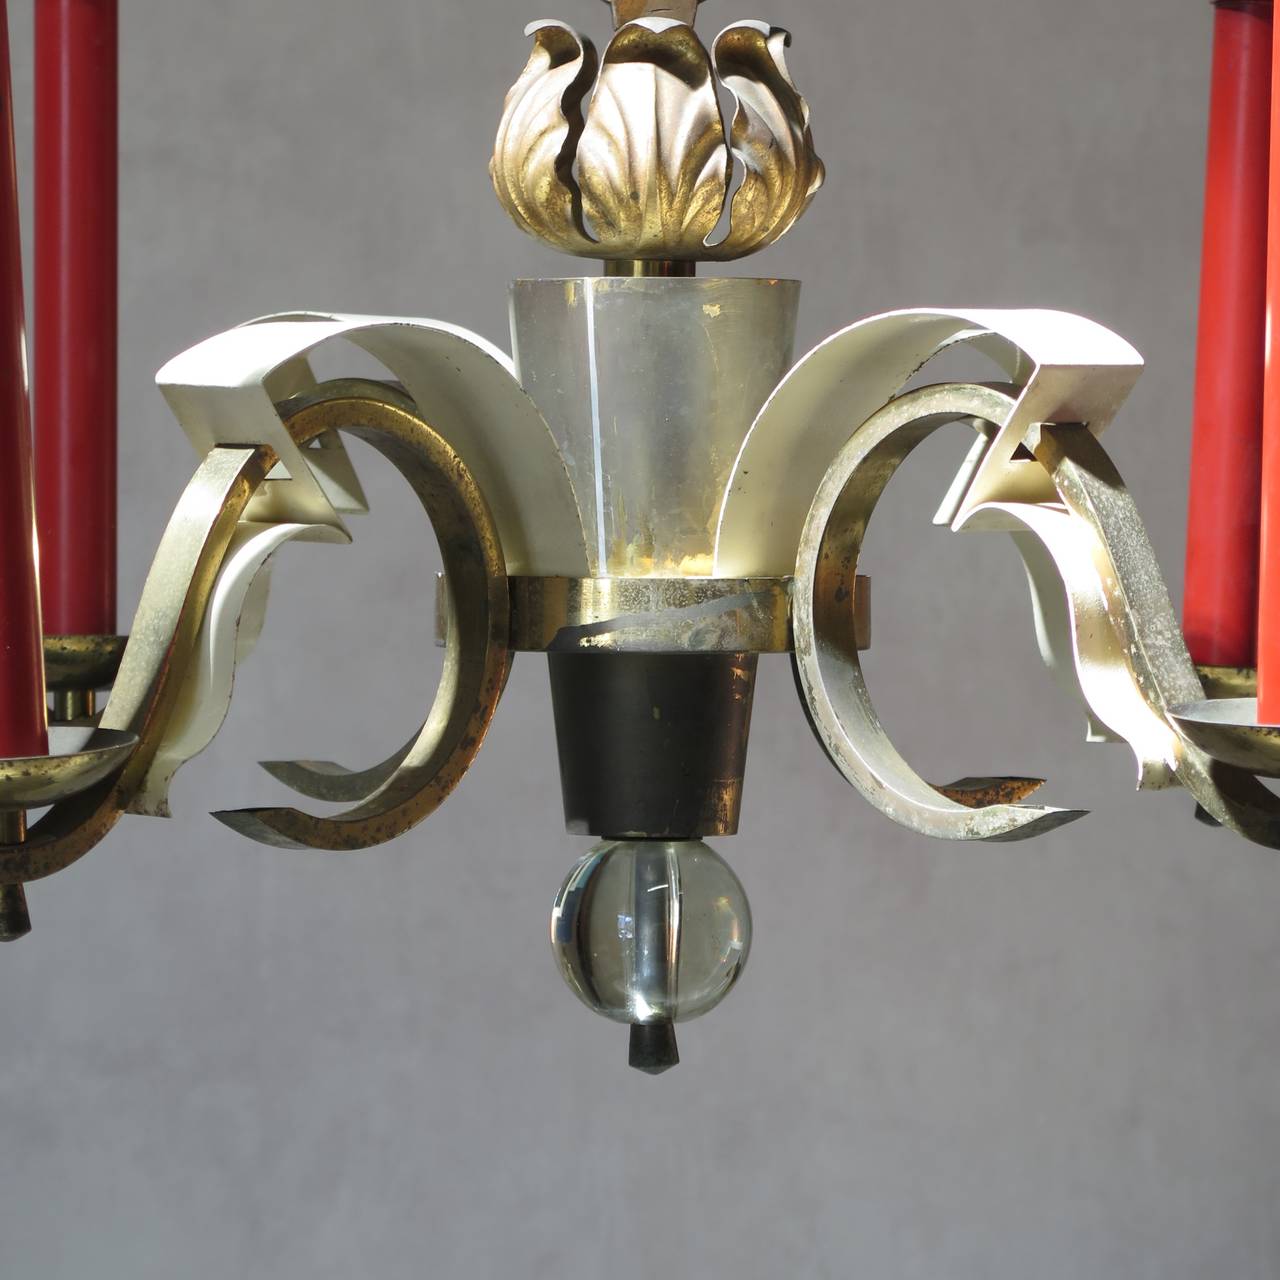 Four-light Art Deco chandelier in brass and off-white painted metal. The four 